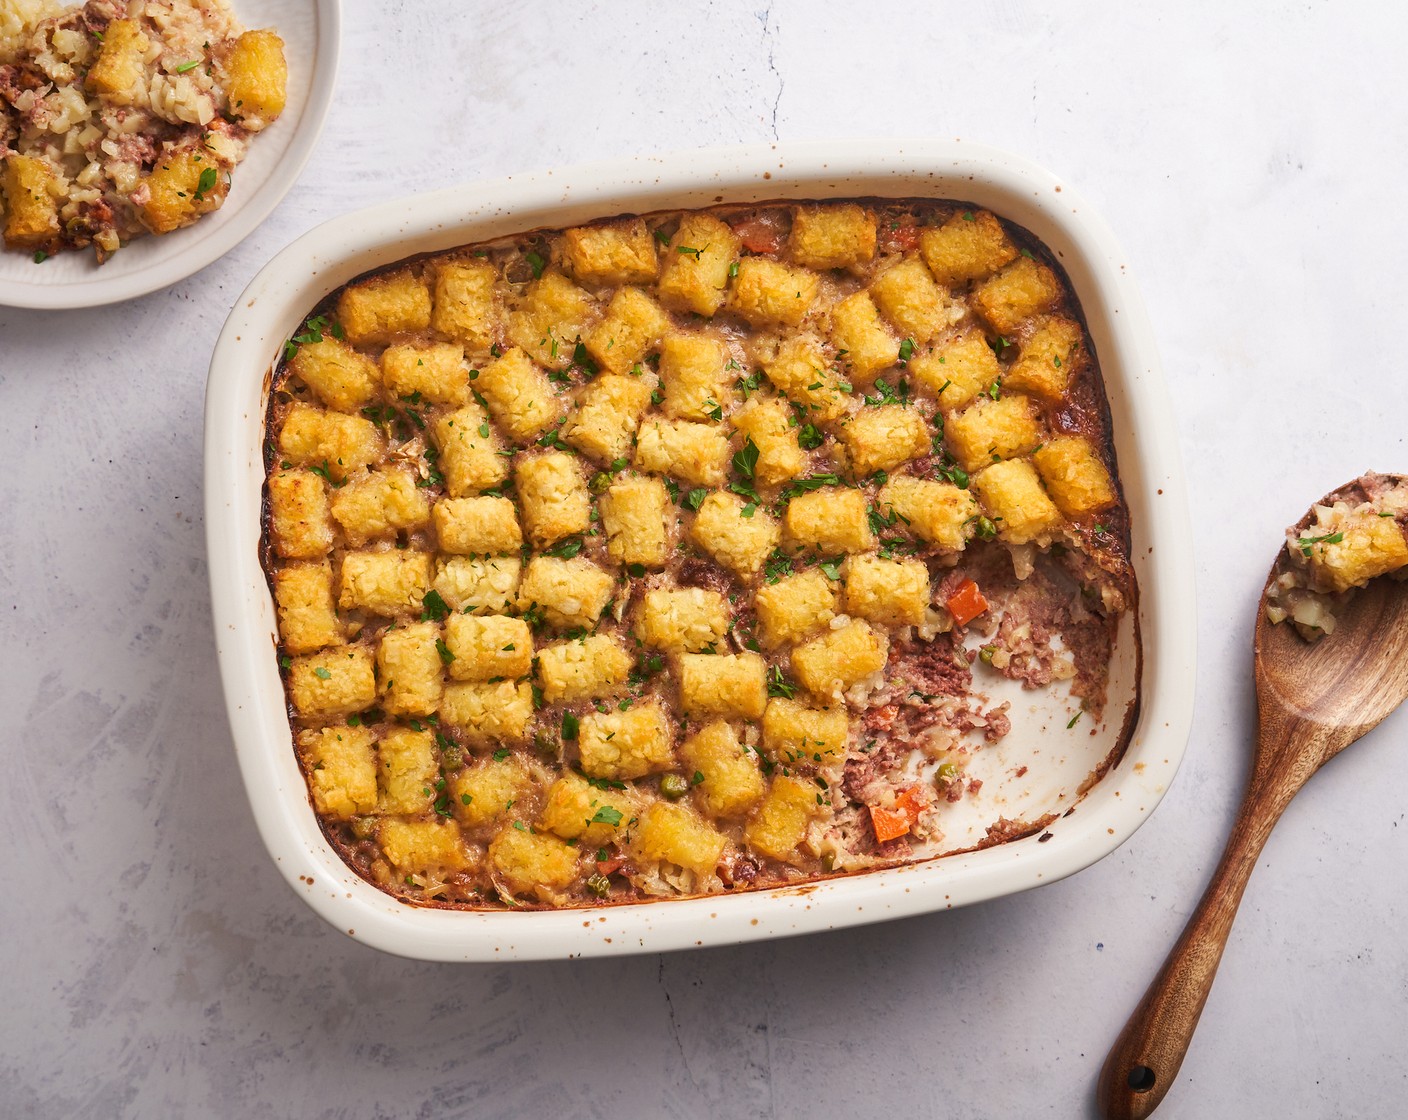 Cheesy Tater Tot Casserole with Corned Beef